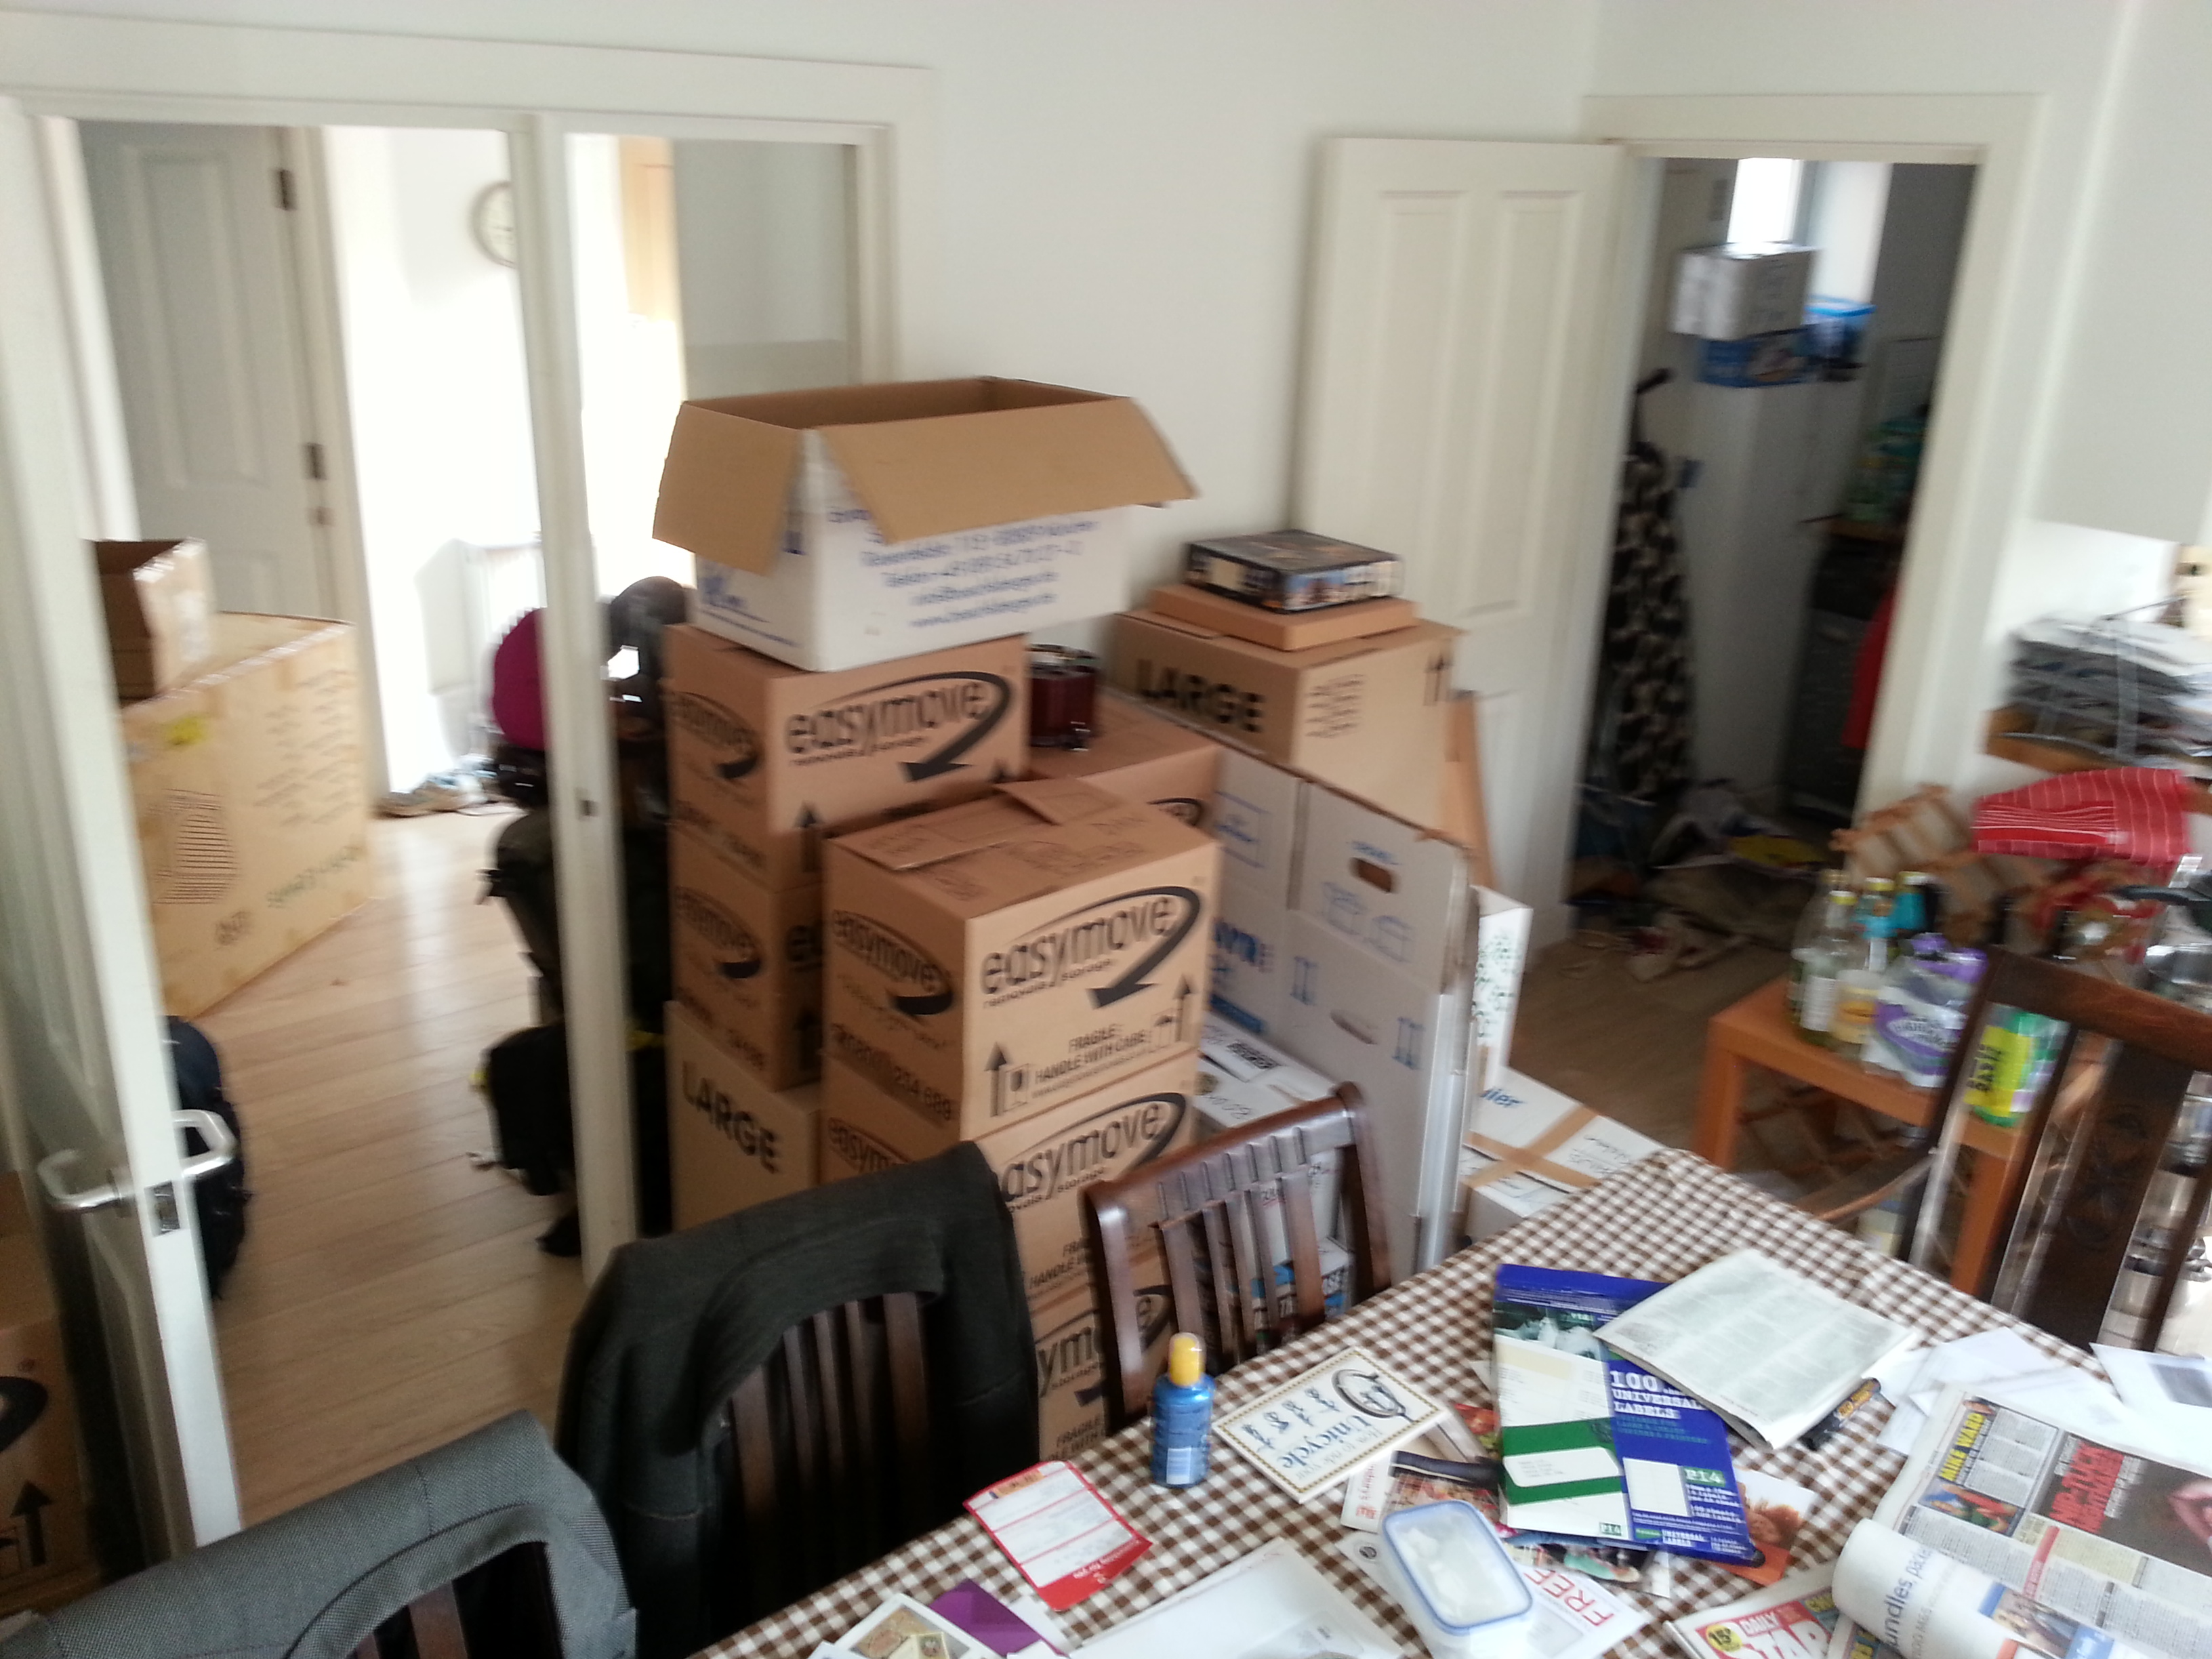 Piles of boxes - mostly full of board games! - at our old house.